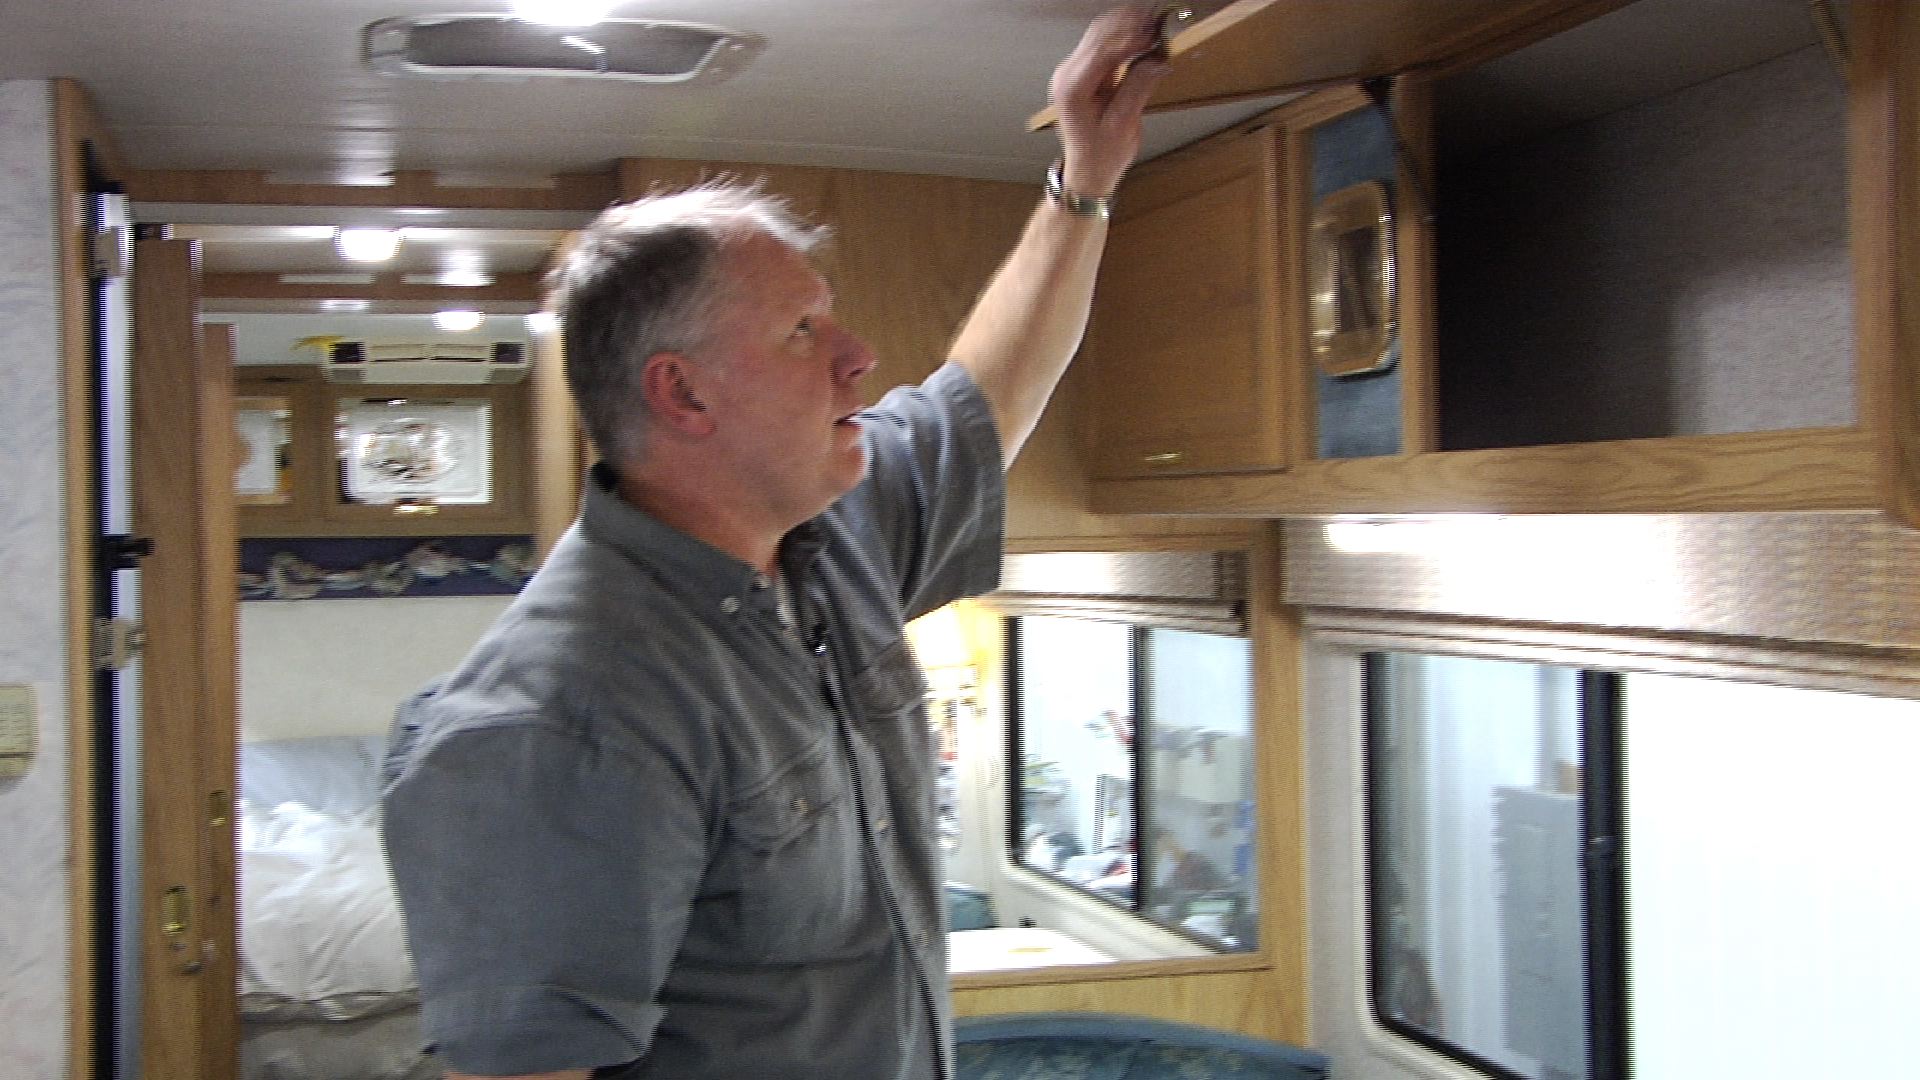 Tips for Quieting Your RV on the Roadproduct featured image thumbnail.